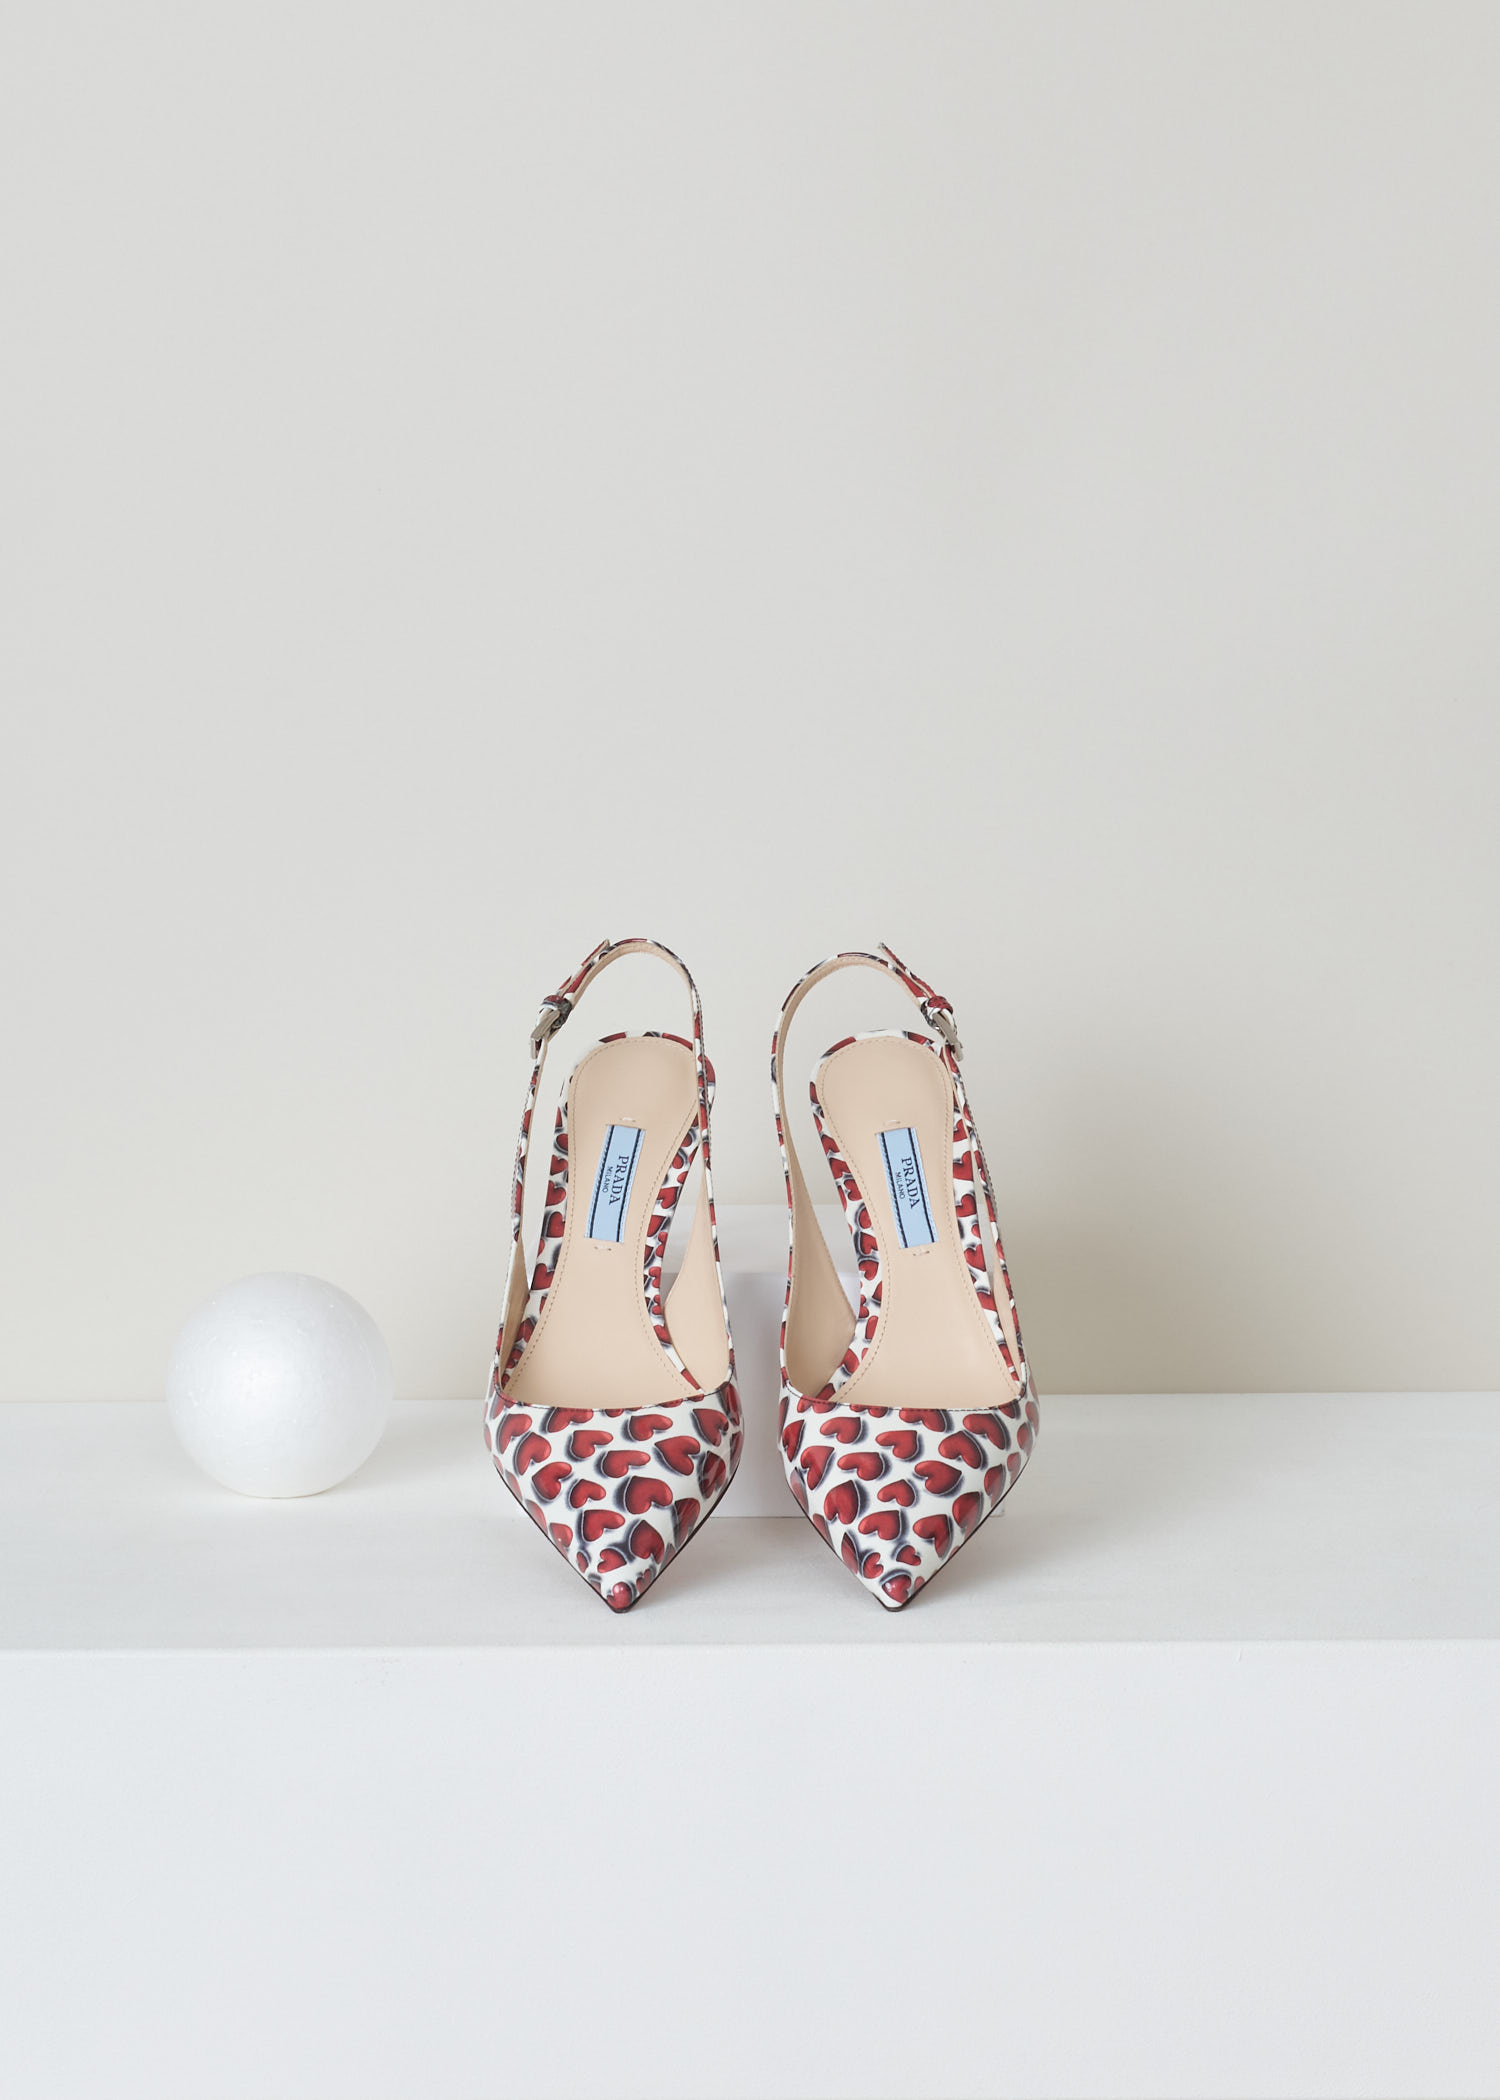 Prada, Red and white patent leather heart print, vernice_cuori_1I833I_F0D56_scarlatto, red white, top, Red and white heart printed slingback. Pointed toe and mid high stiletto heel. With a gold-tone logo plaque on the sole.